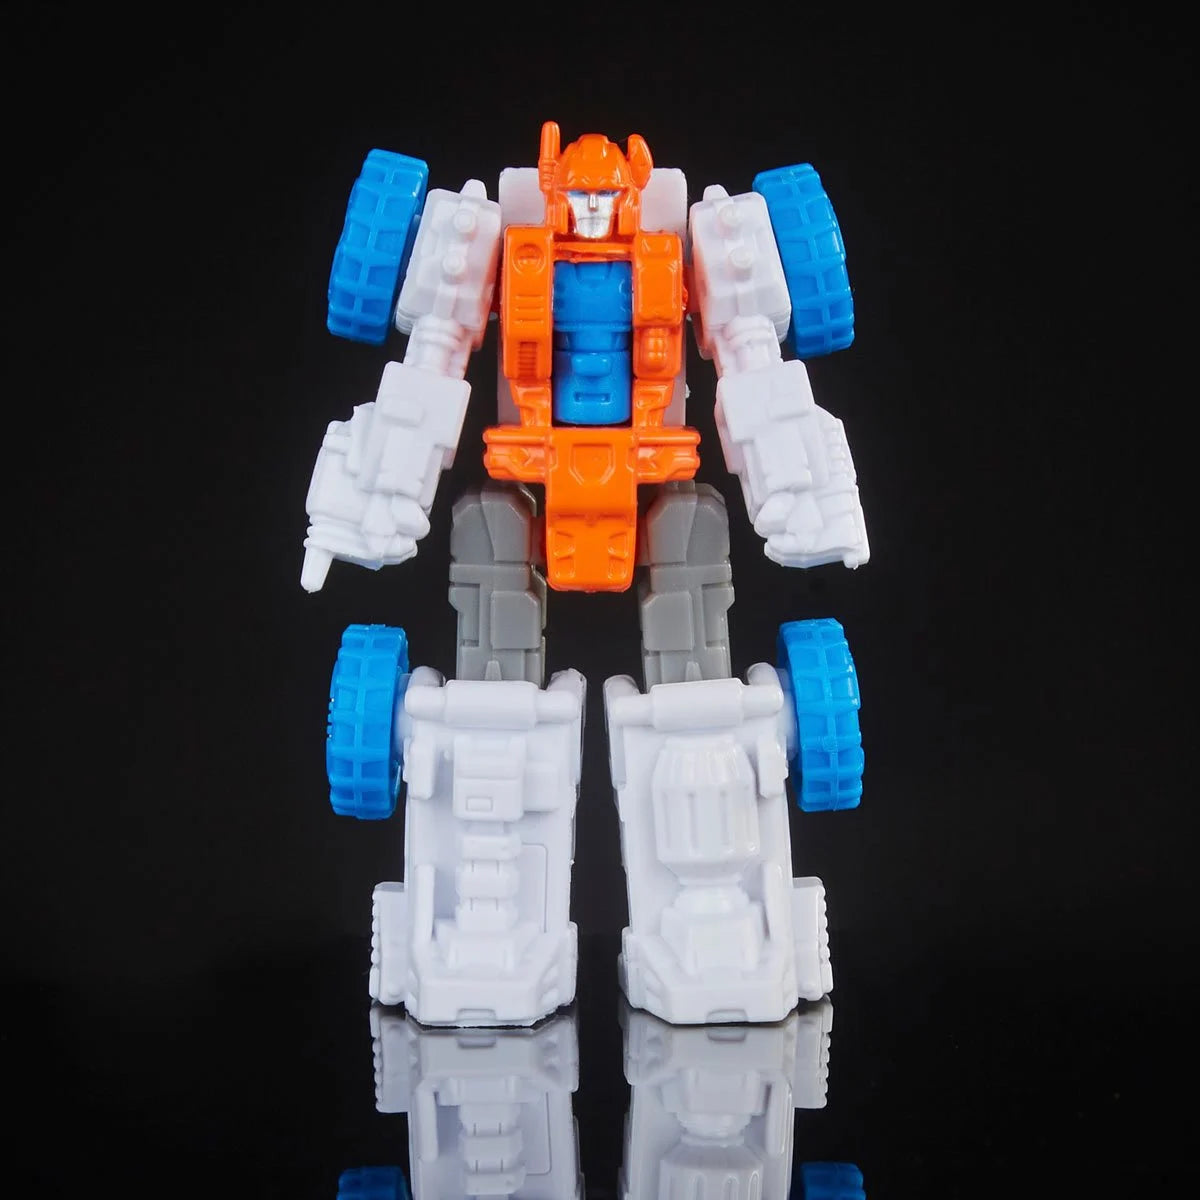 Transformers Generations Selects Titan Class Guardian Robot and Lunar-Tread Action Figure Toy